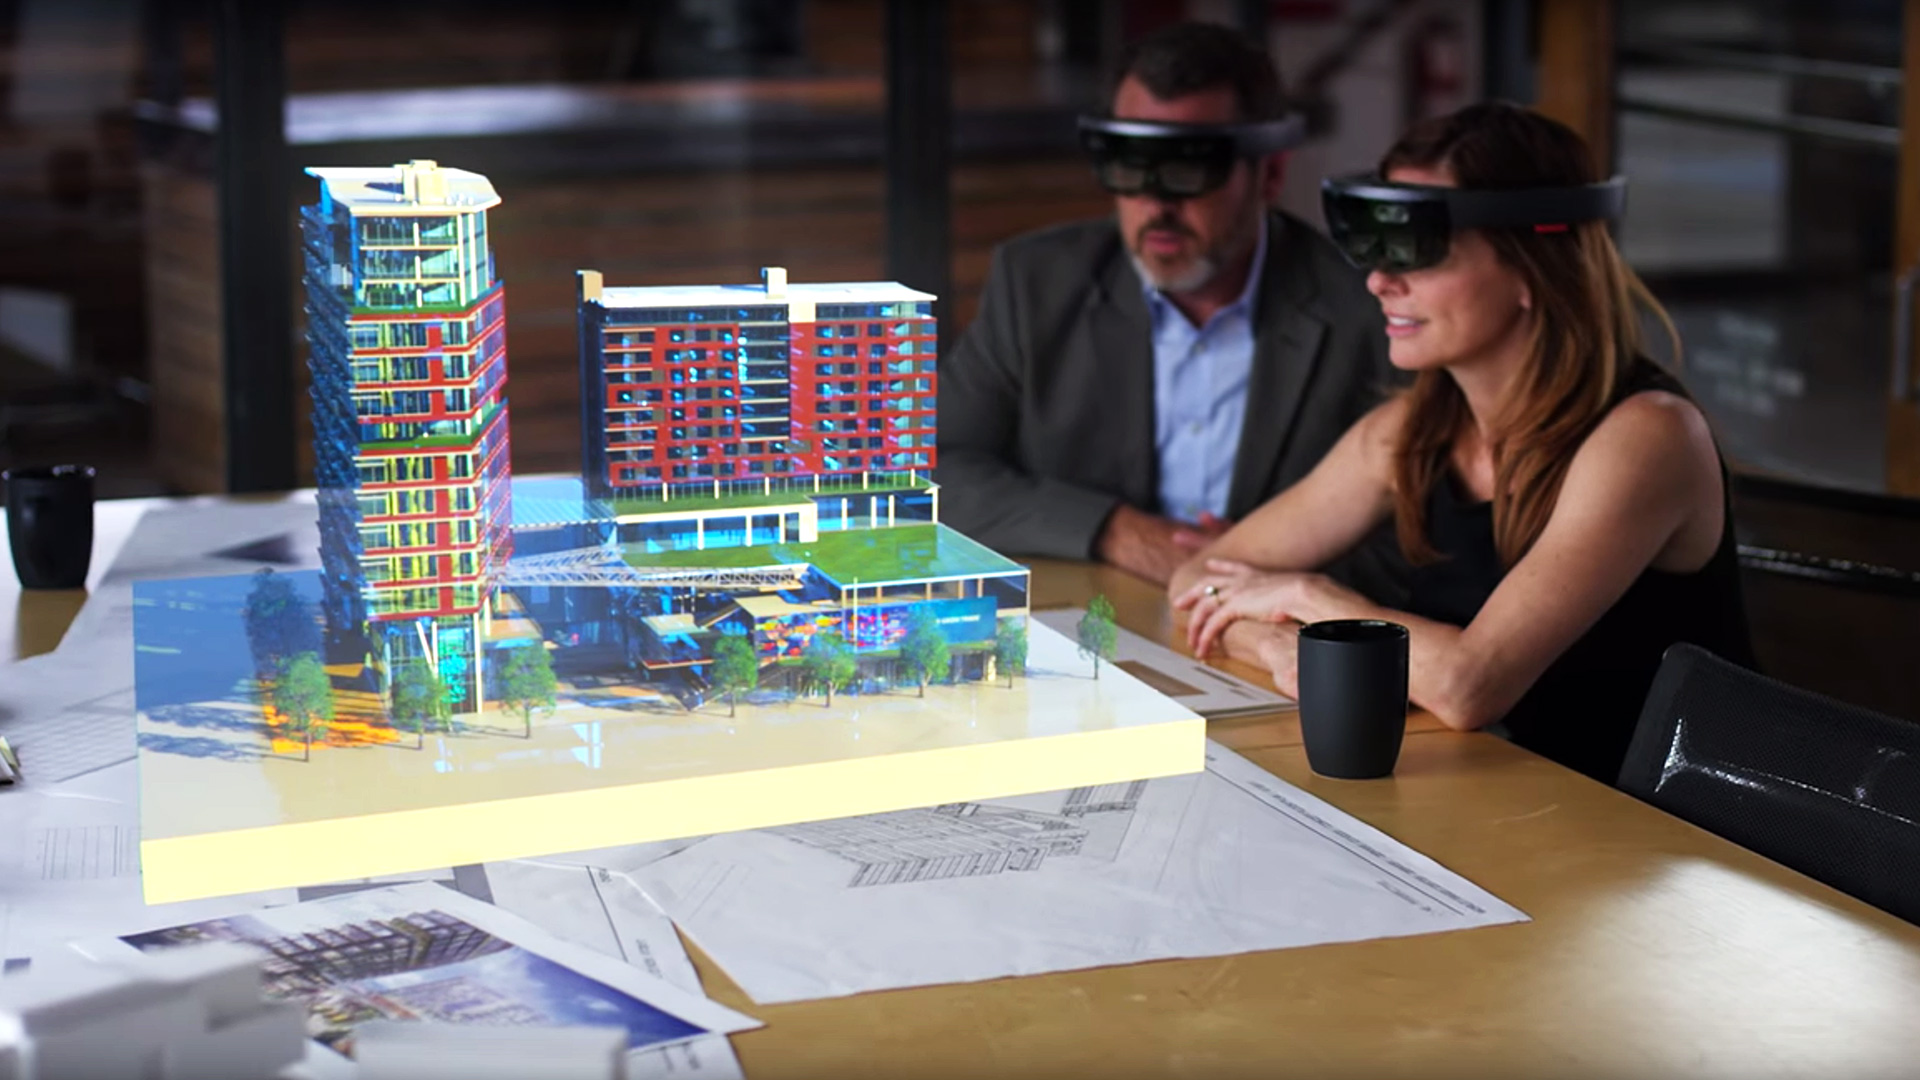 Architects look at a holographic building with Microsoft Hololens